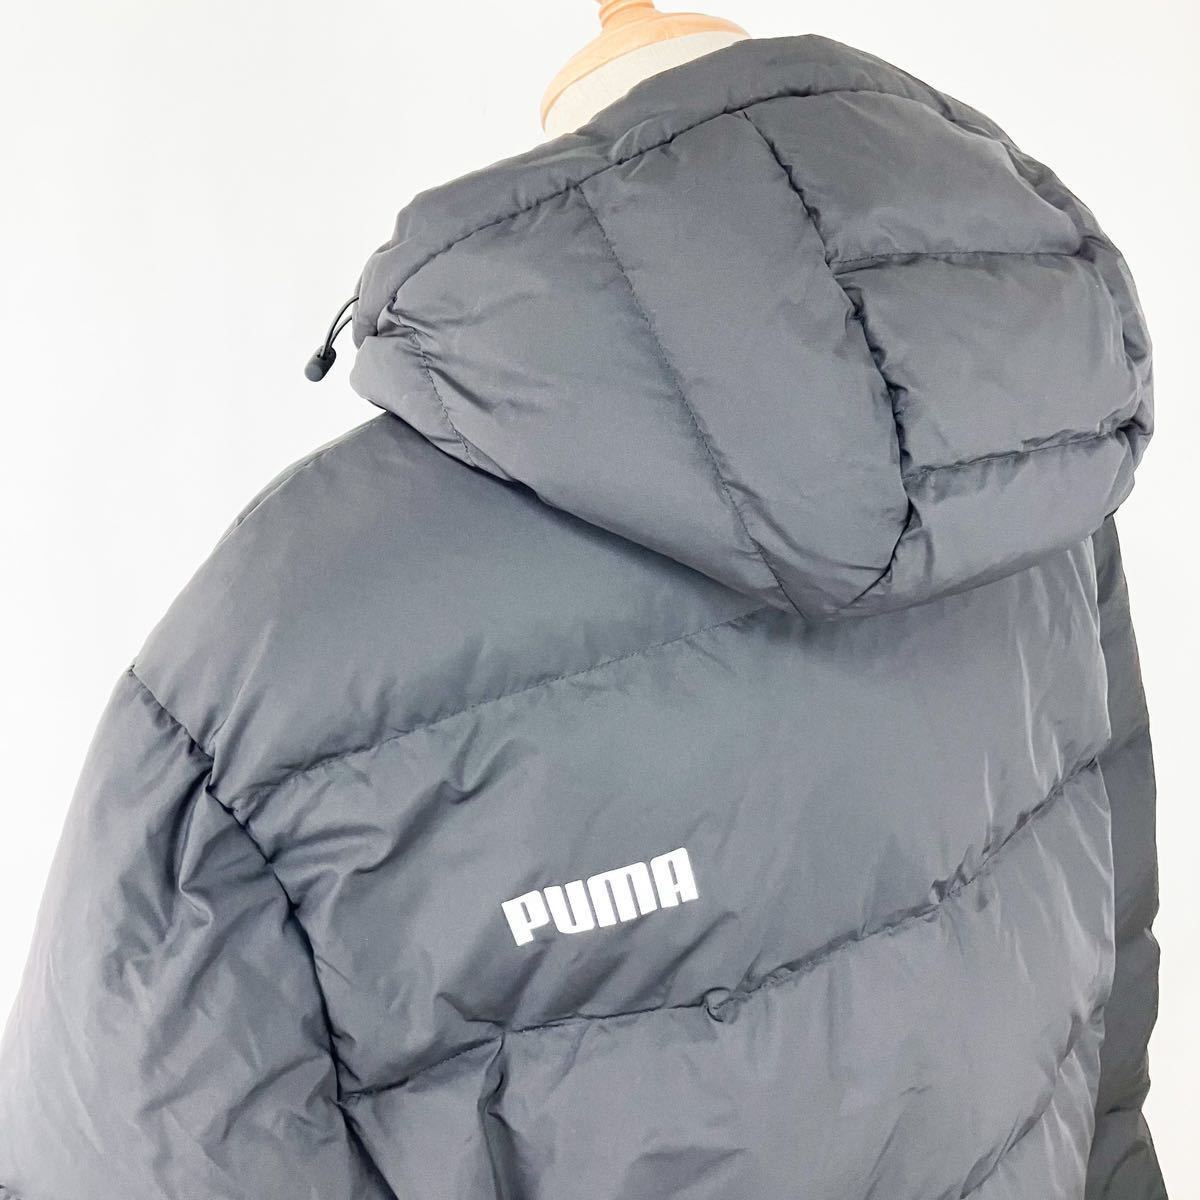  new goods unused PUMA Puma large size down jacket XL size polyester made cotton inside Golf wear outer black simple AY0668